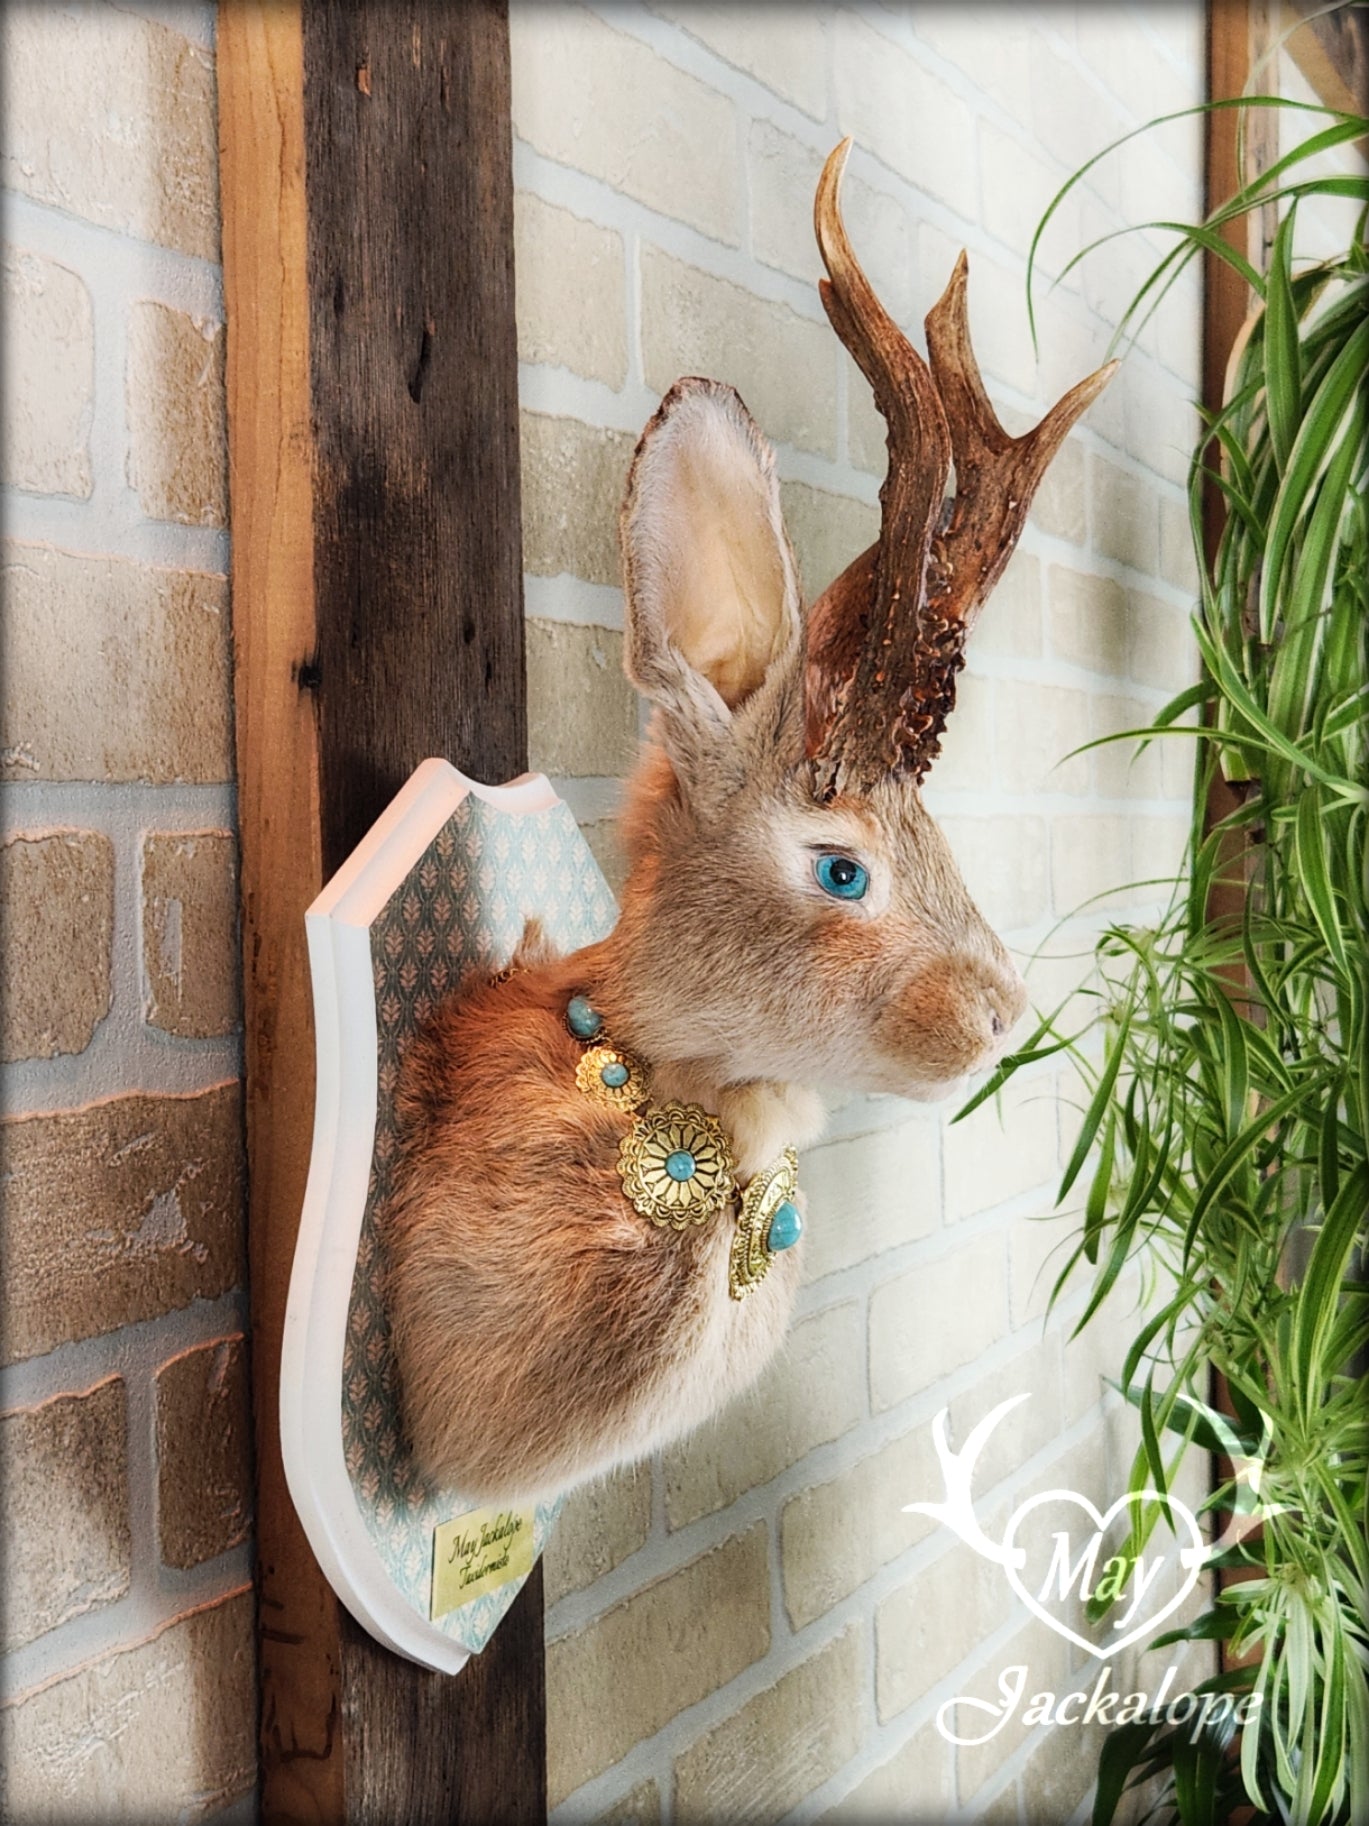 Golden Jackalope taxidermy with teal eyes, real antlers and a necklace